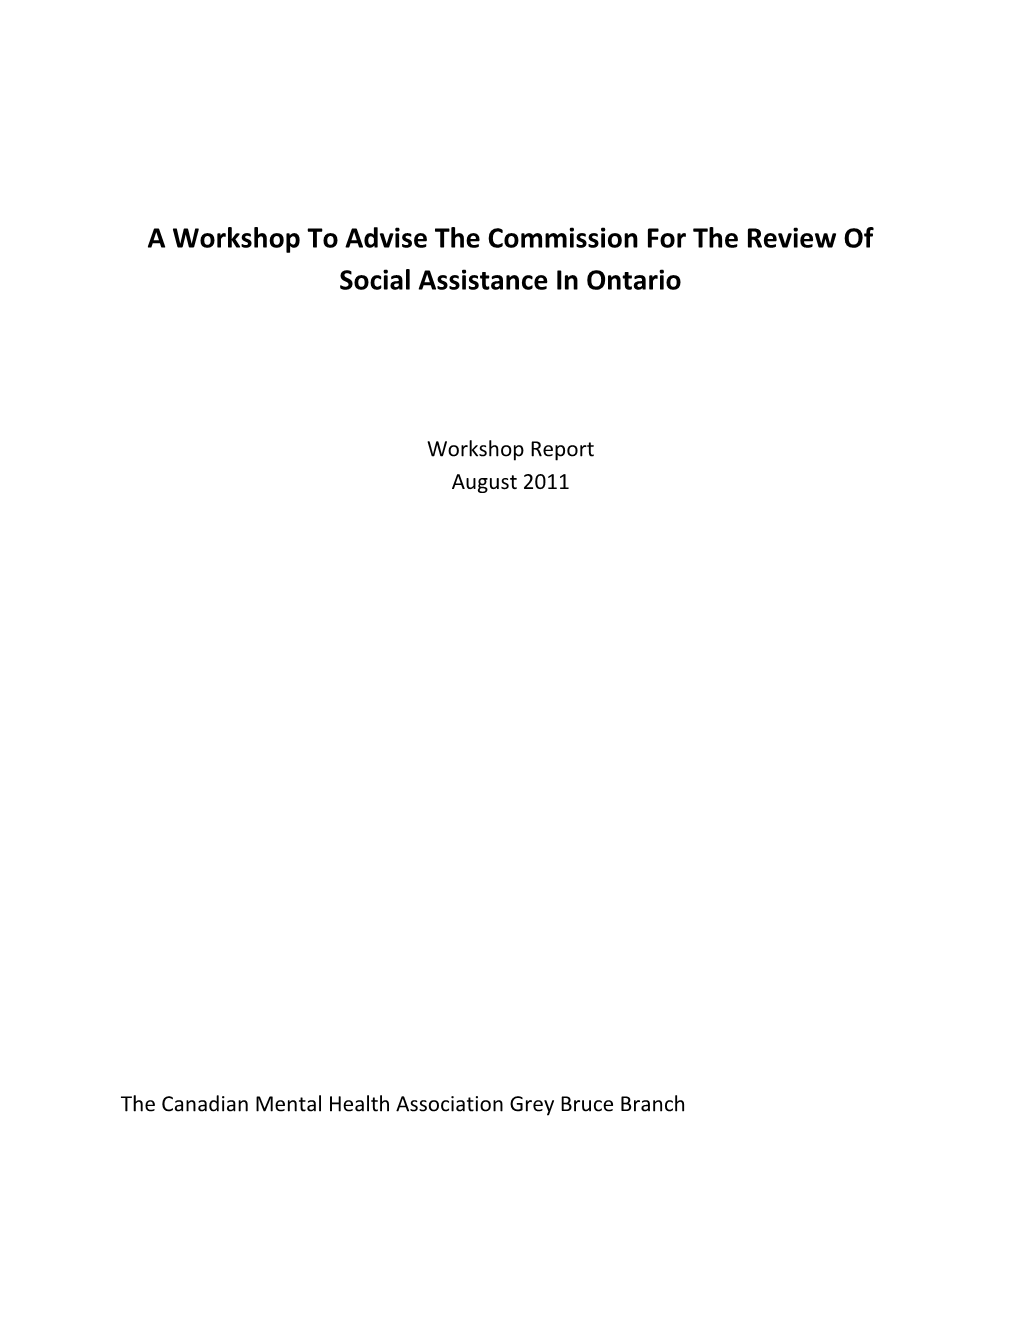 A Workshop to Advise the Commission for the Review of Social Assistance in Ontario